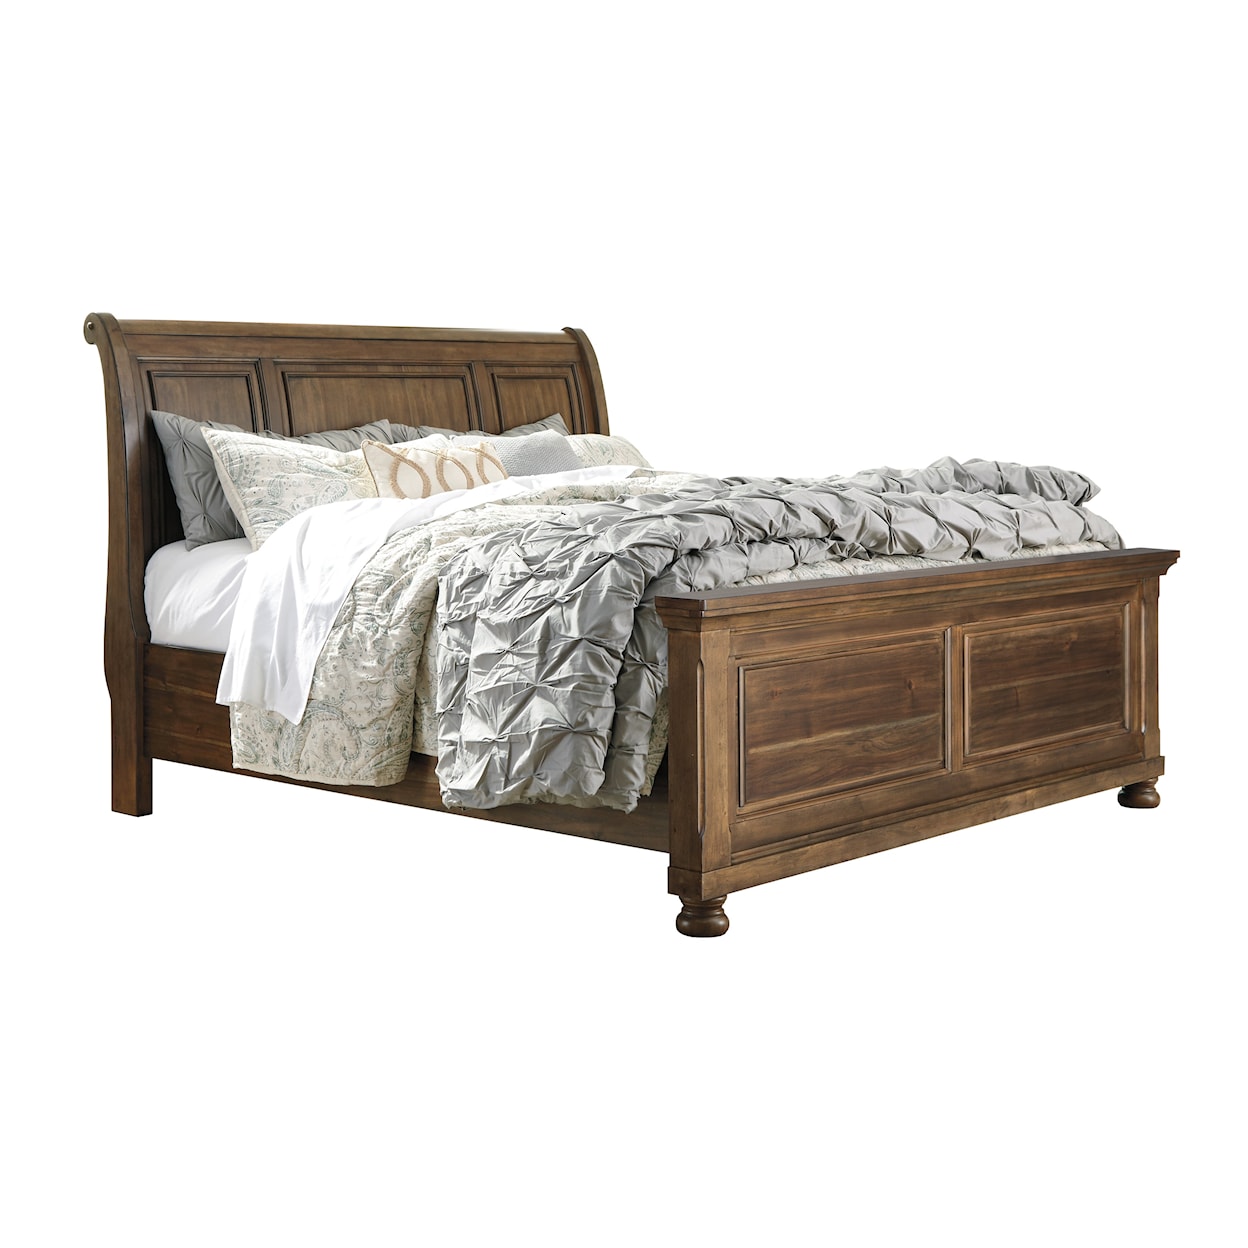 Signature Design by Ashley Flynnter King Sleigh Bed